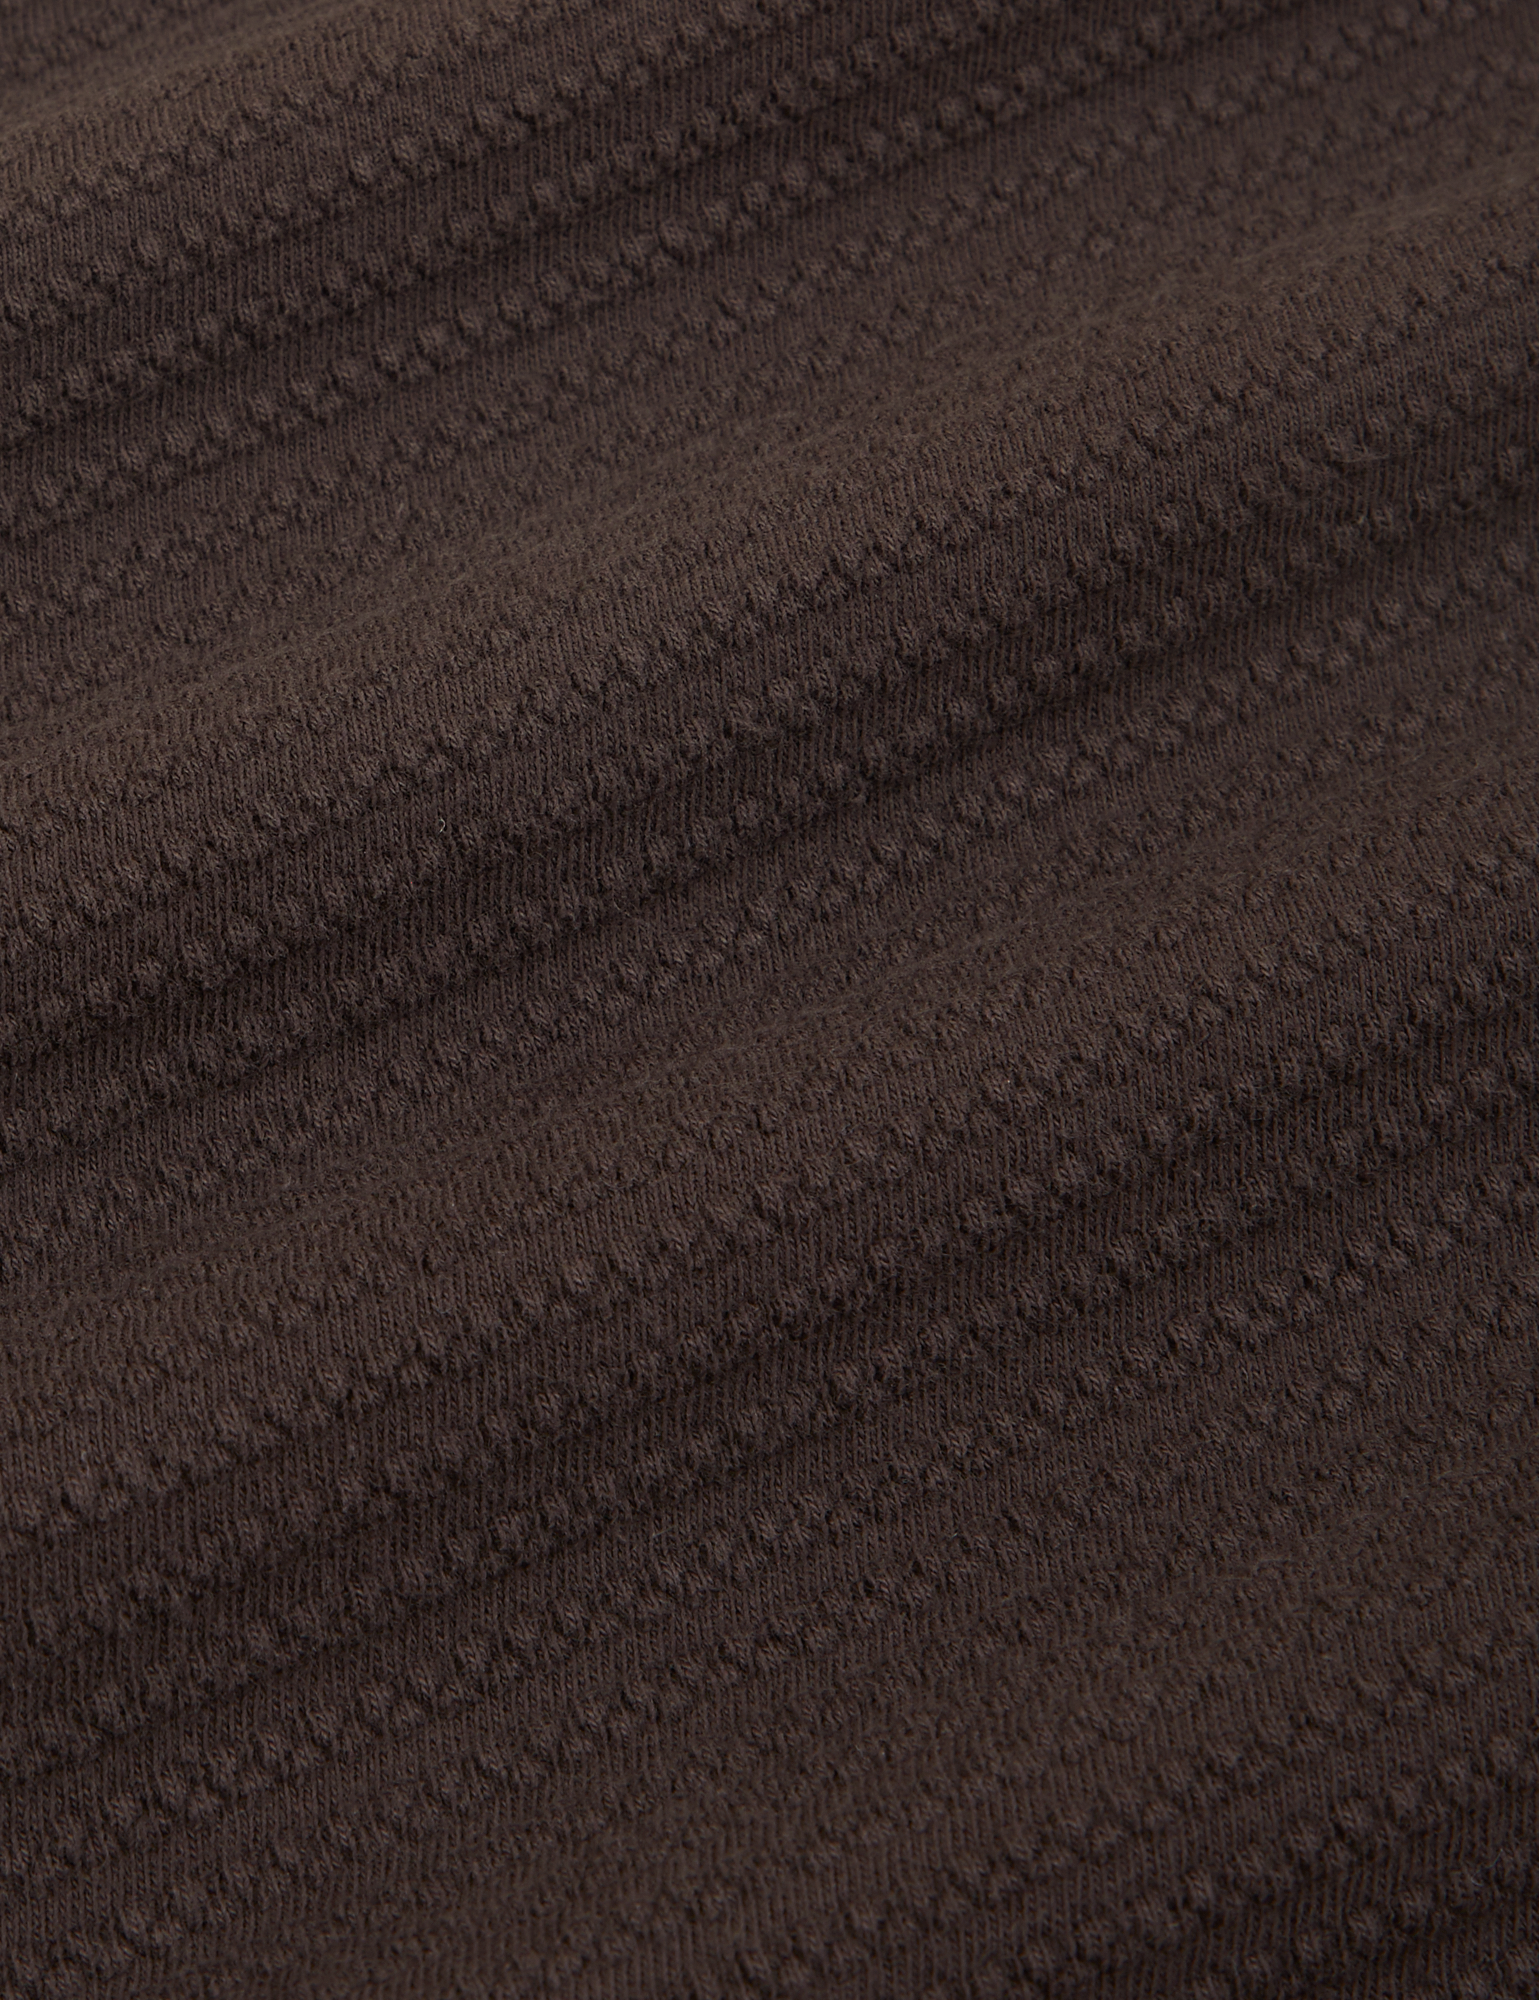 Honeycomb Thermal in Espresso Brown fabric detail close up